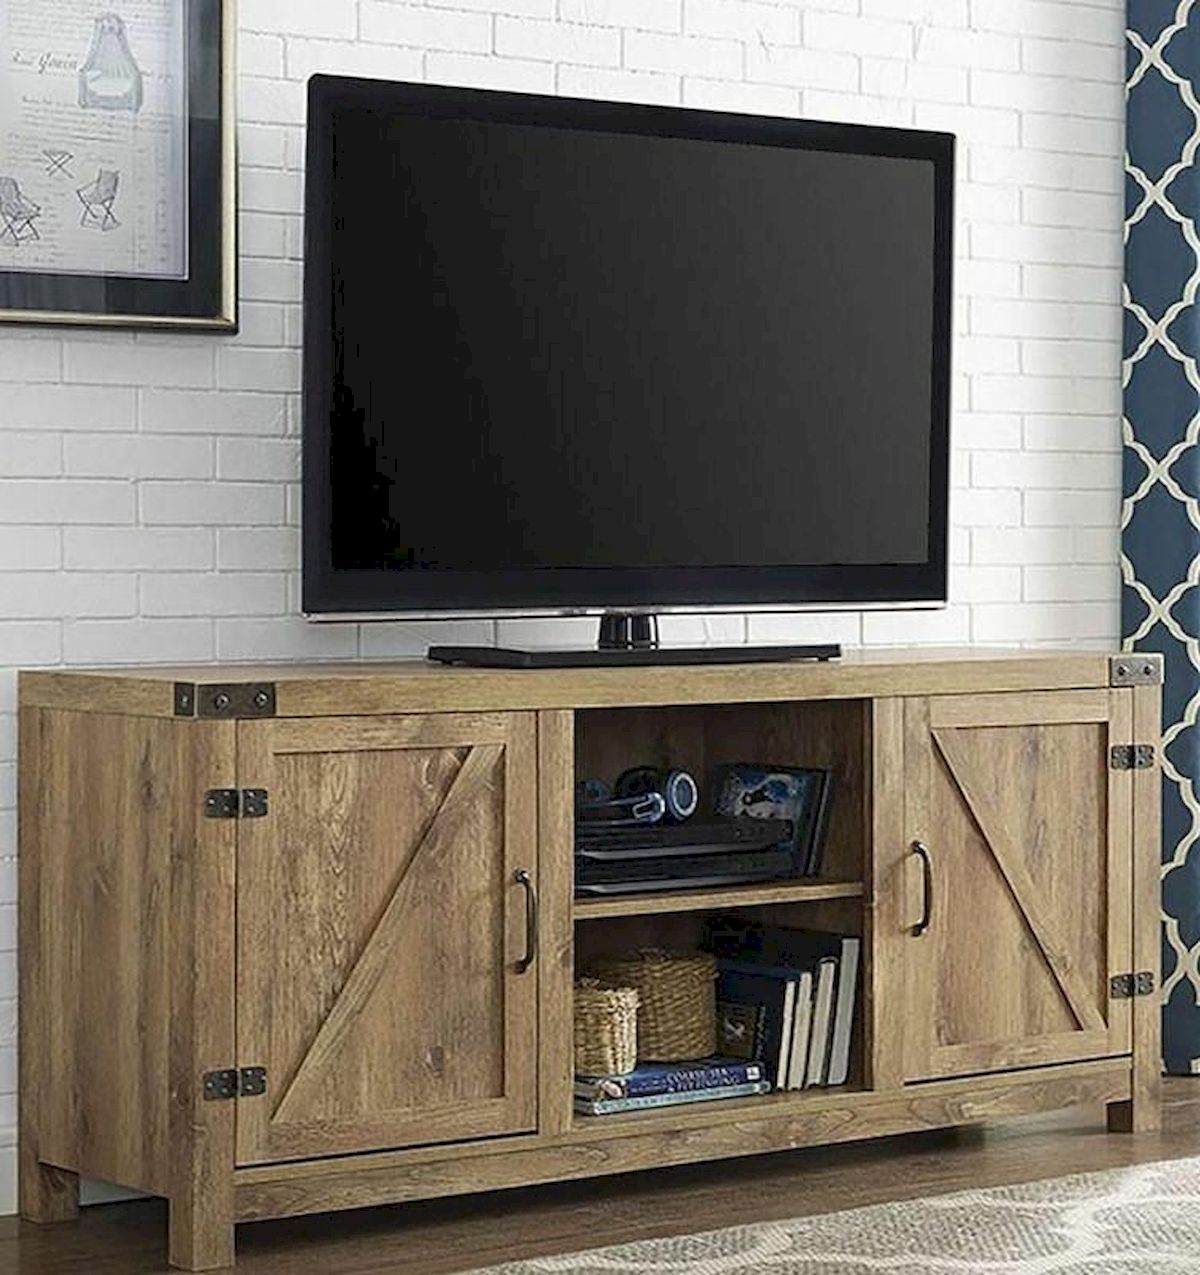 50 Awesome Pallet Furniture TV Stand Ideas For Your Room Home (3)